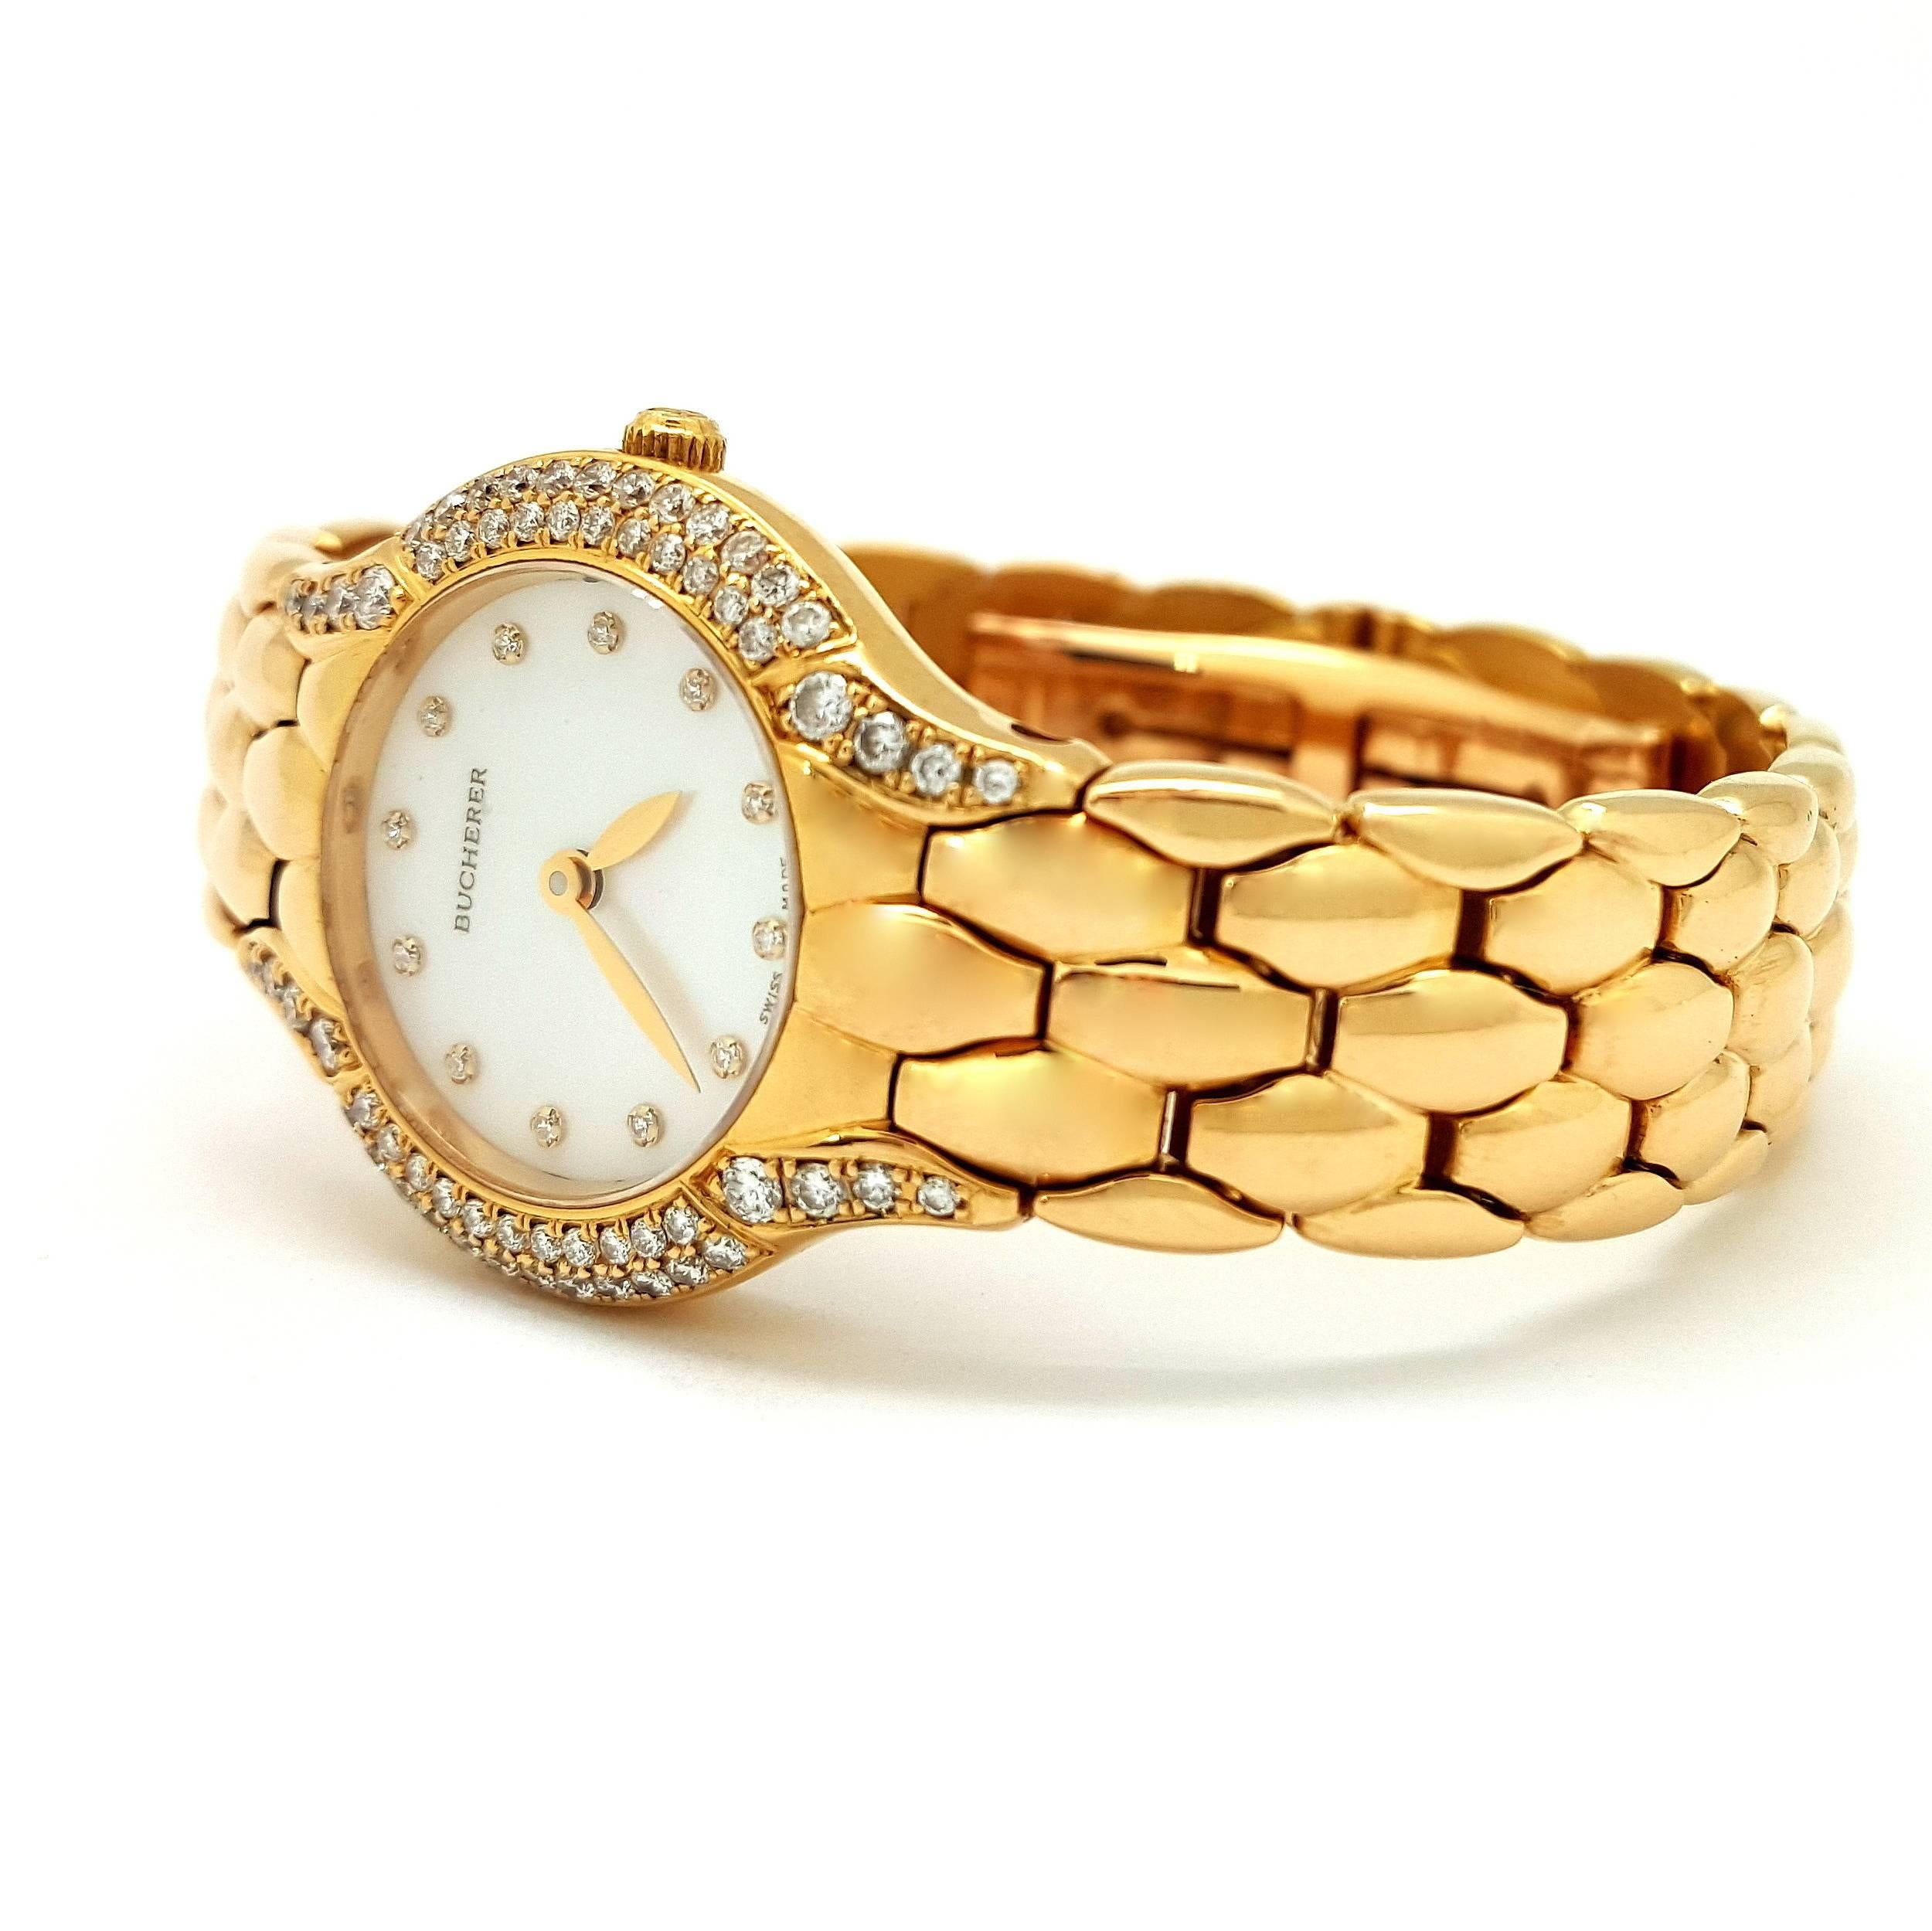 Flawless Bucherer 18k yellow watch, 24mm solid gold case covered in 60 beautiful VS quality diamonds, along with a mother of pearl dial and diamond hour markers, able to fit a 6 inch wrist. First time buyer or connoisseur of this watch will make the